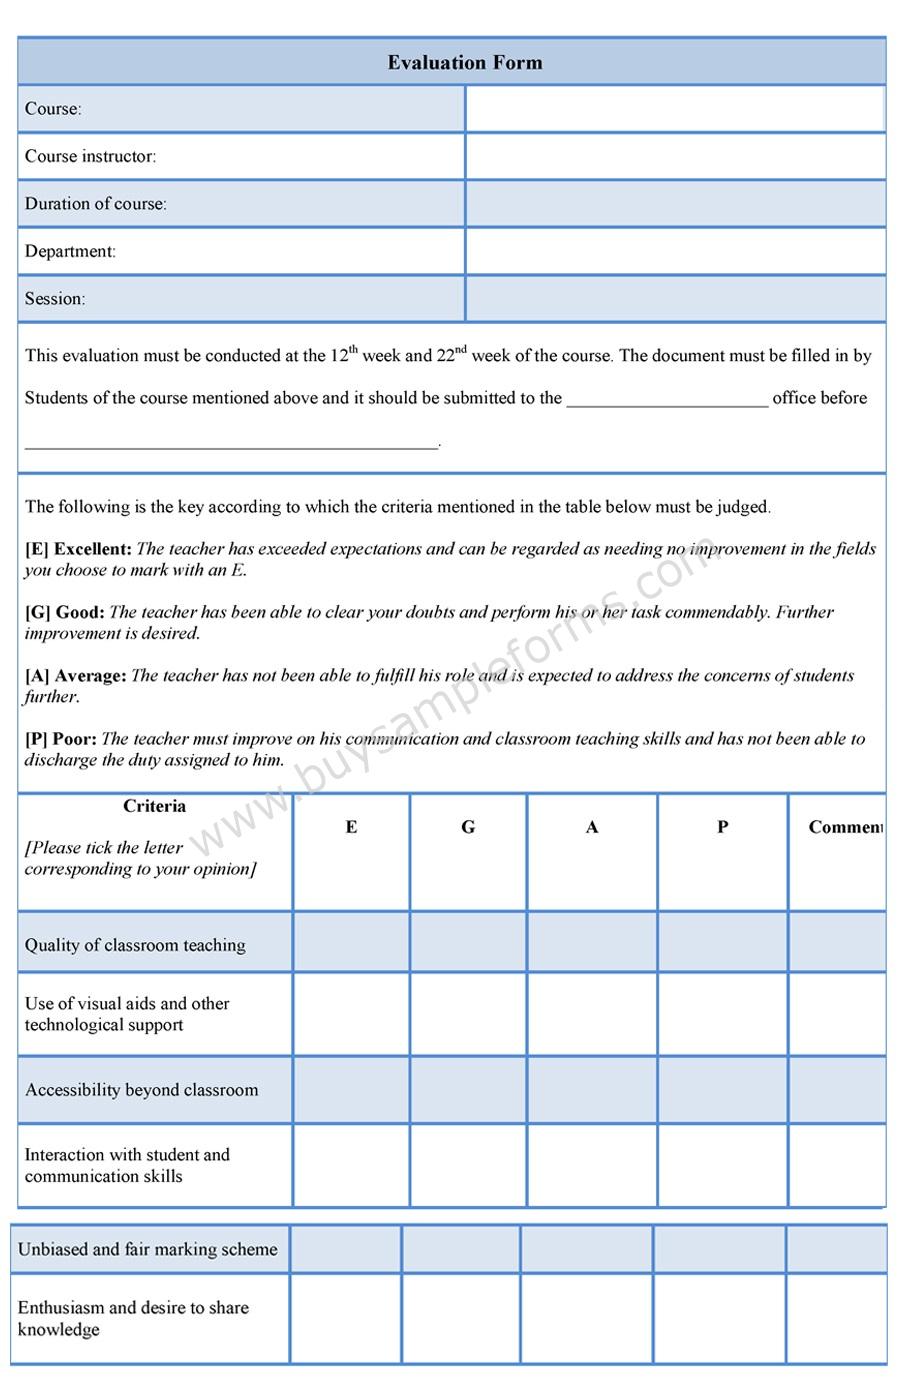 sample-employee-evaluation-forms-evaluation-employee-evaluation-form